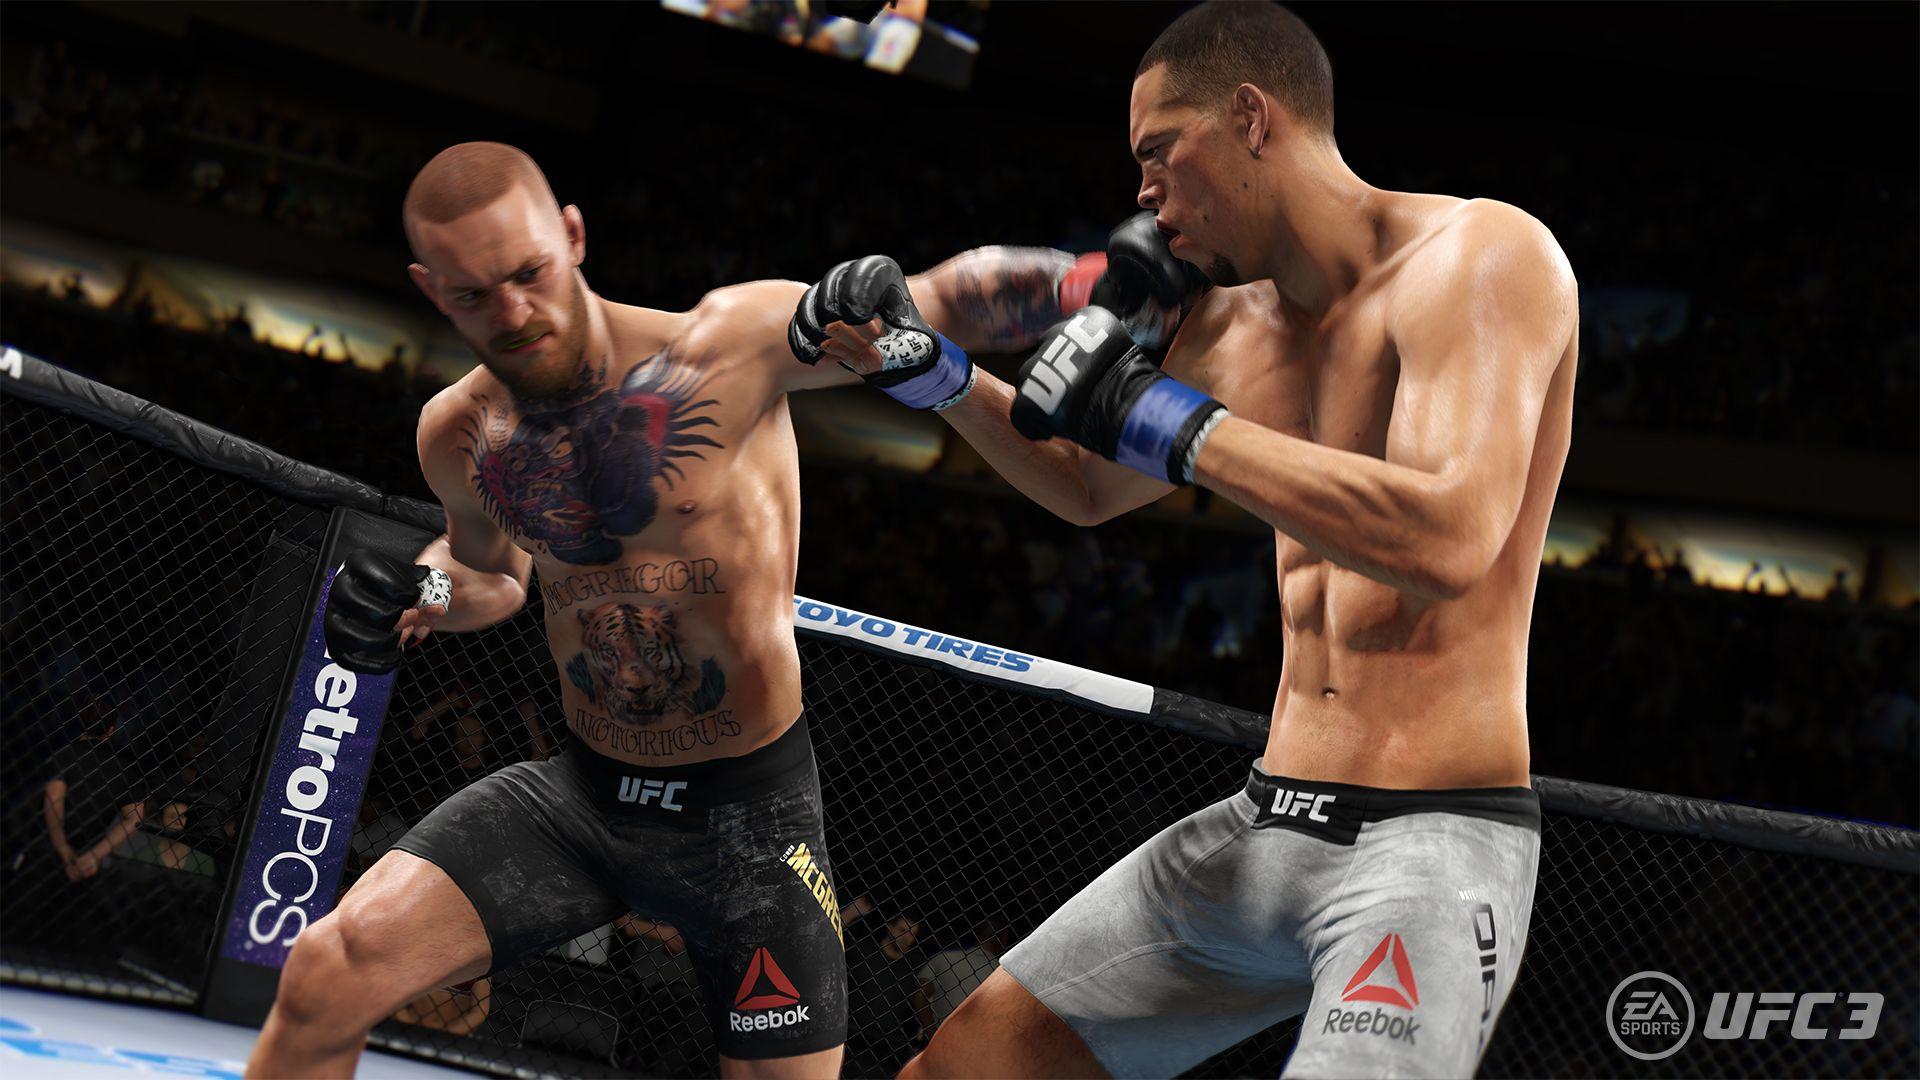 EA SPORTS UFC 3 BETA IS NOW OPEN TO ALL PLAYERS ON XBOX ONE AND